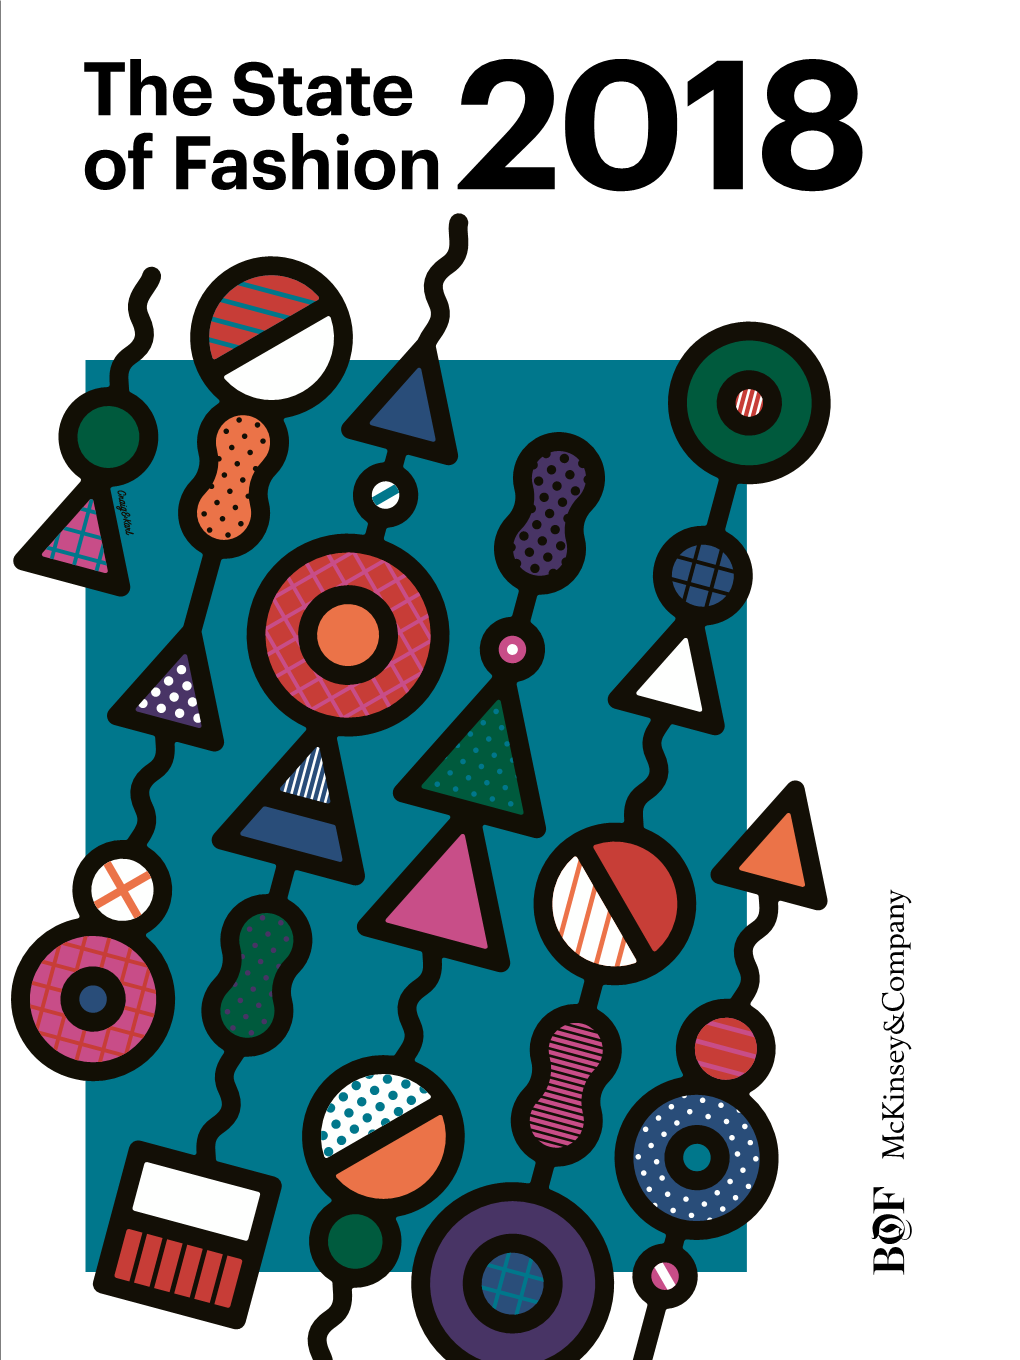 The State of Fashion 2018 Copyright the Business of Fashion and Mckinsey & Company © 2017 the State of Fashion 2018 the State of Fashion 2018